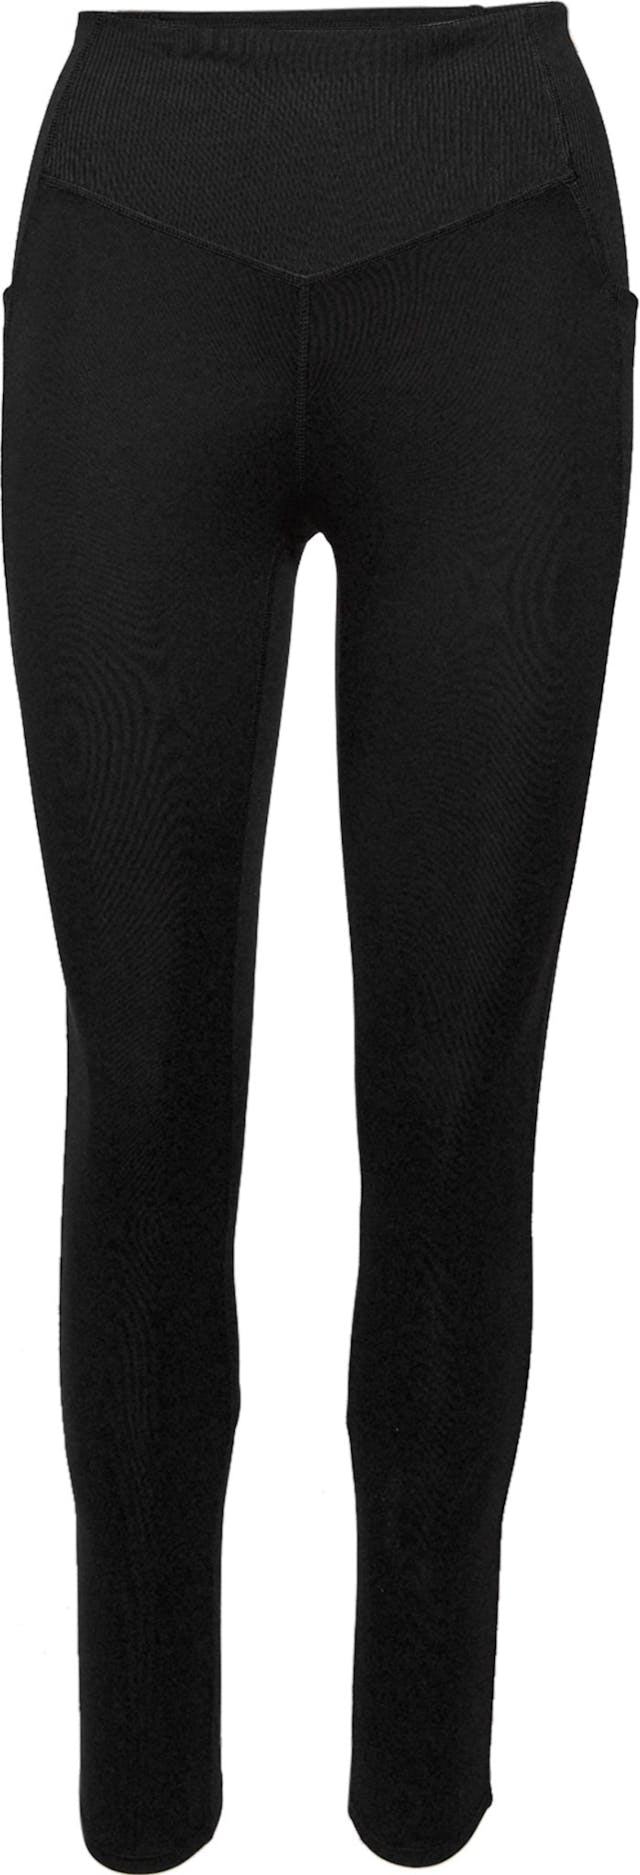 Product image for Ea Dune Sky Duet Tight - Women's